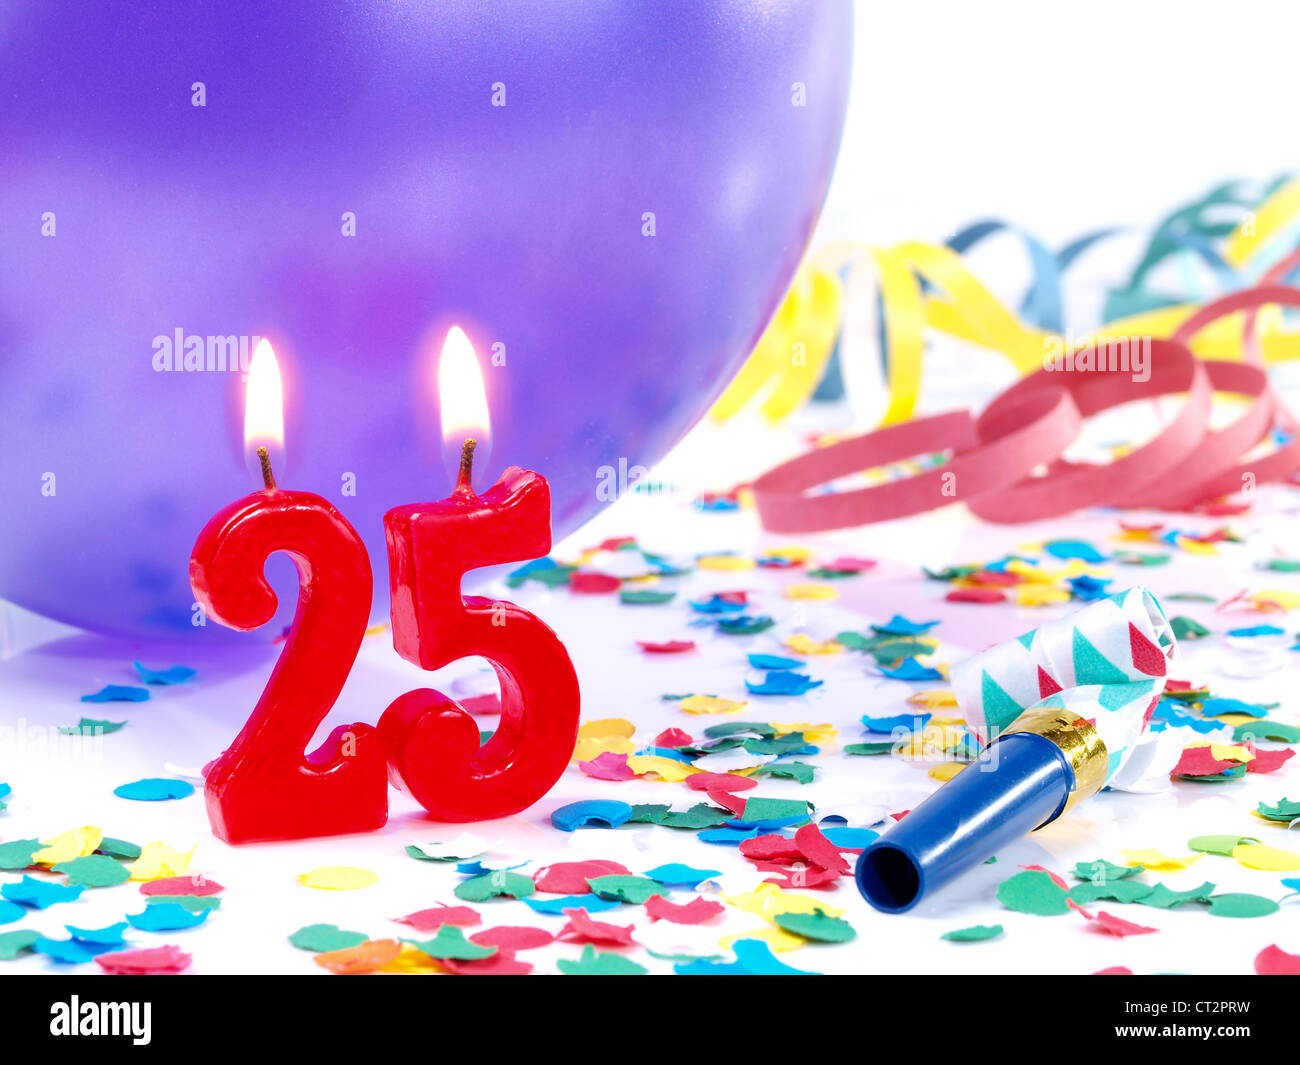 Birthday-anniversary candles showing Nr. 25 Stock Photo